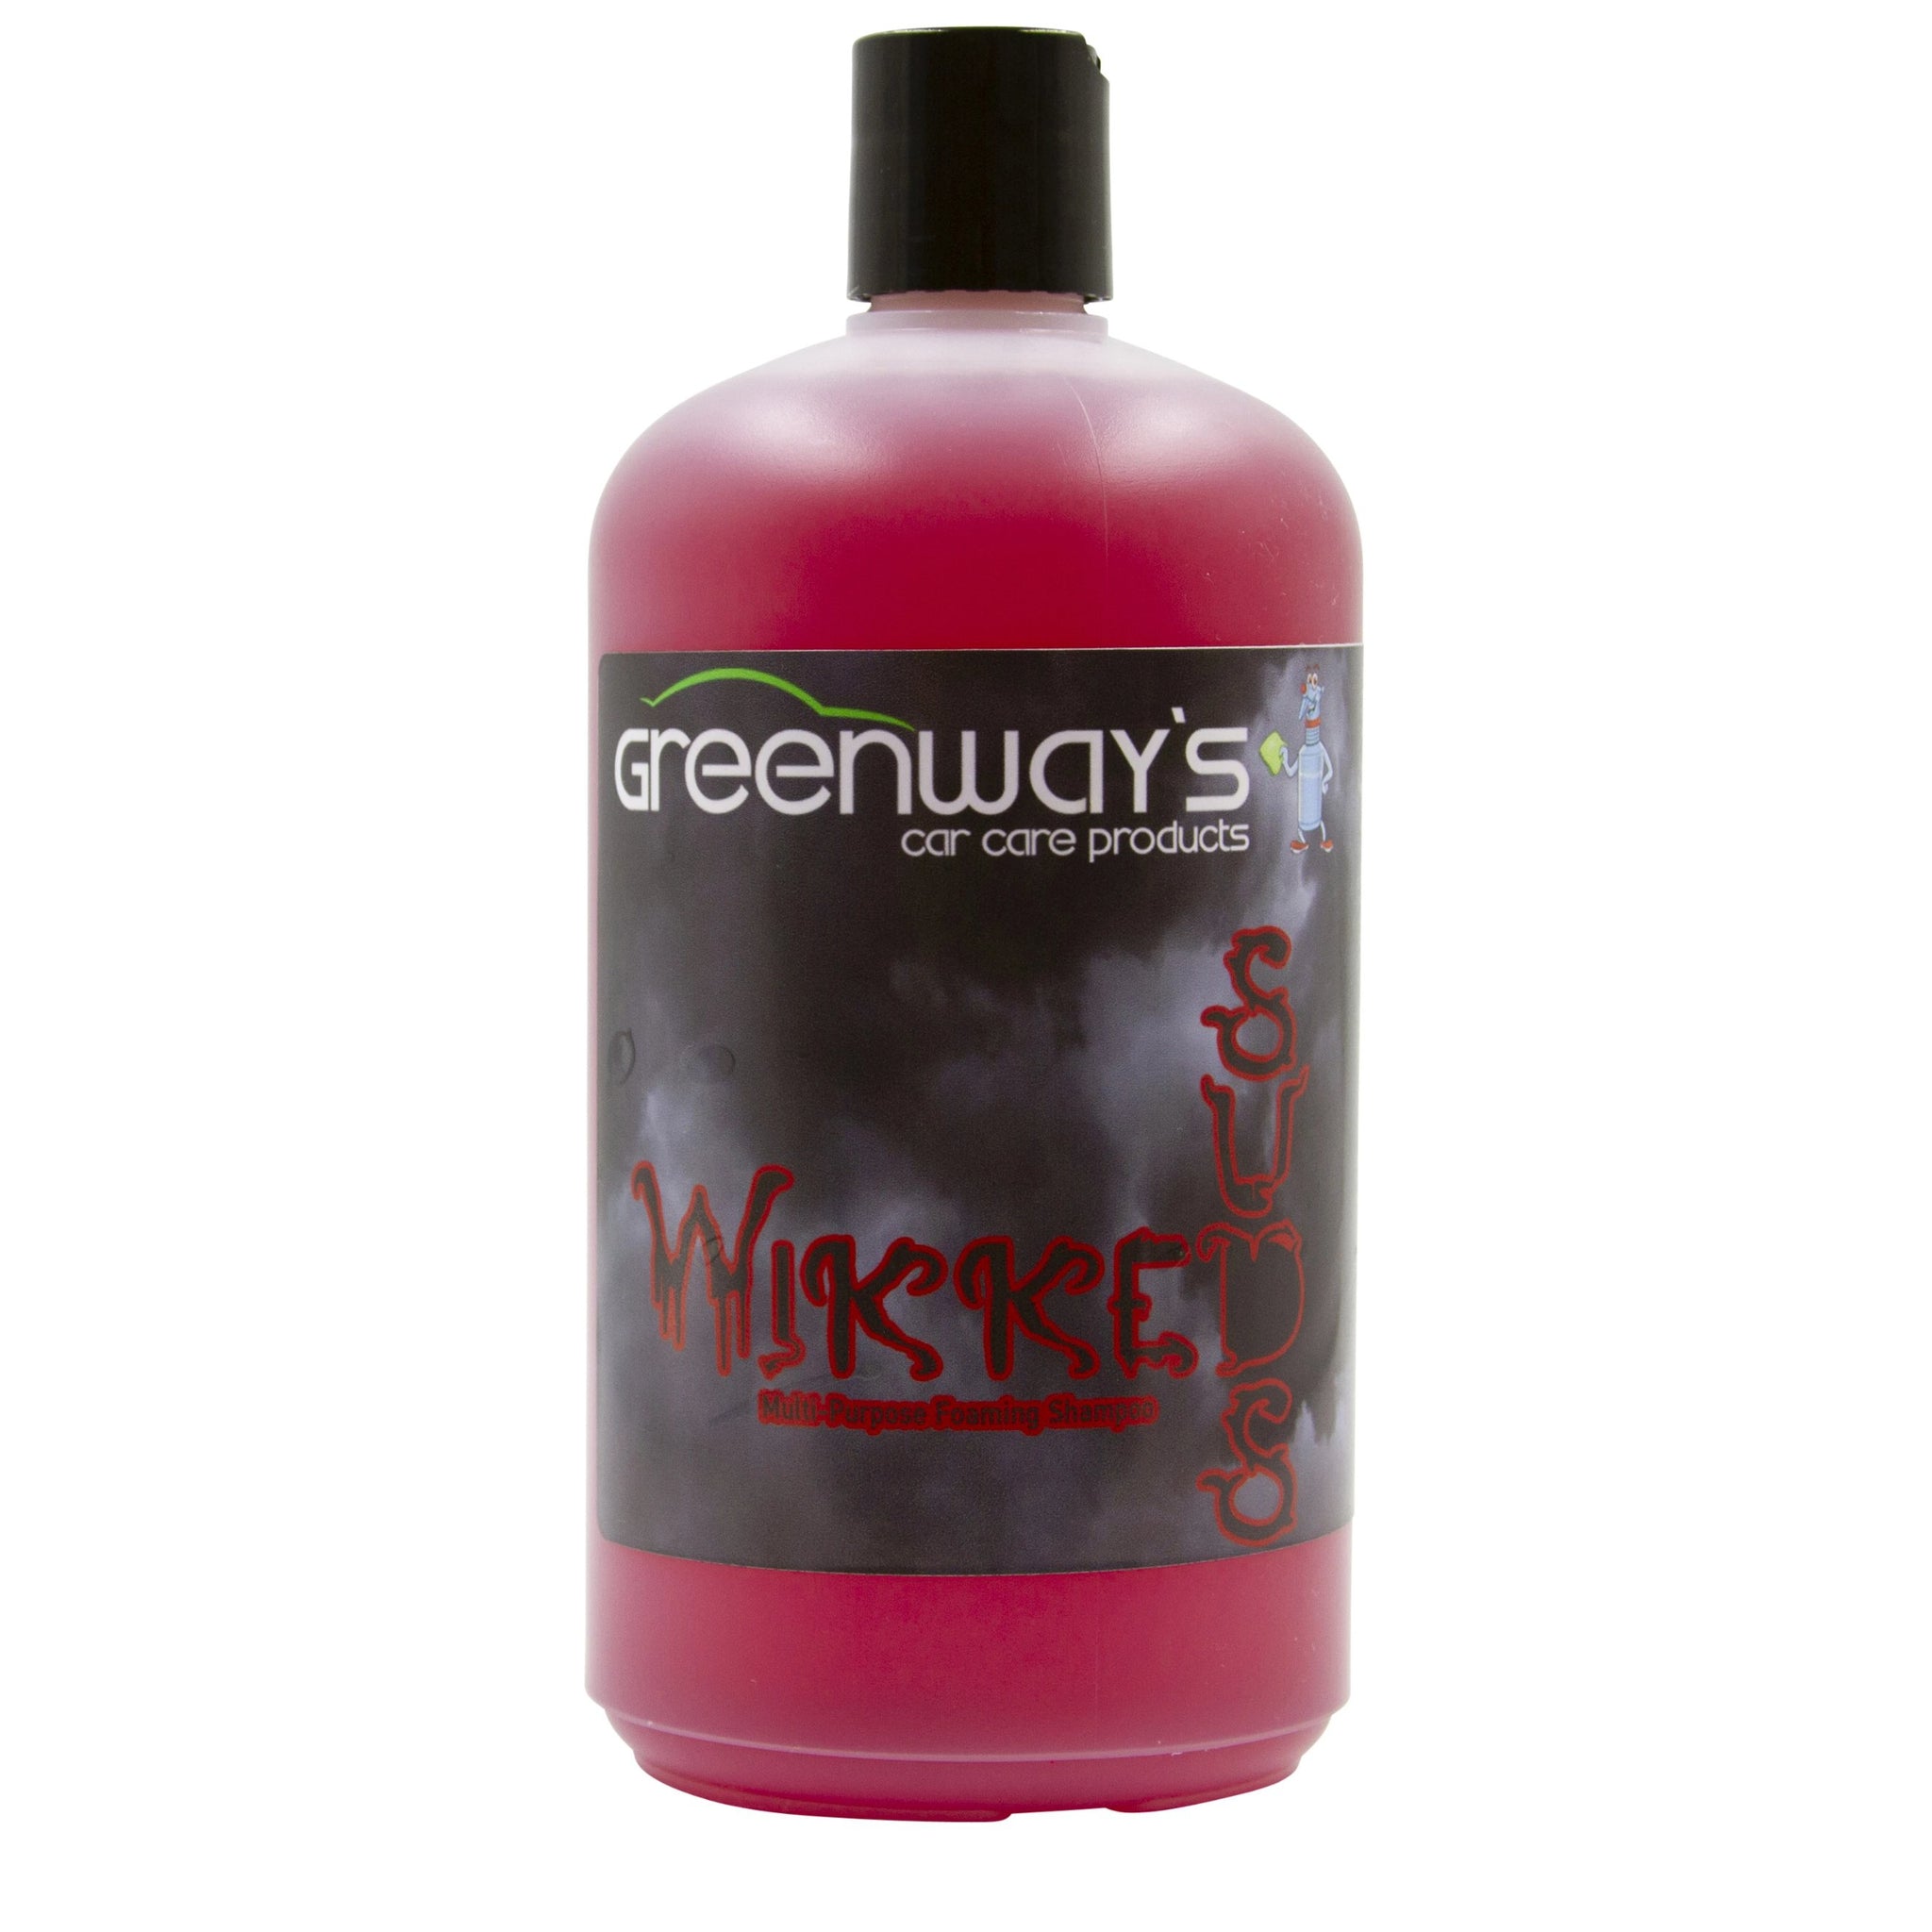 Greenway’s Wikked Suds, high pH and foaming multipurpose car soap, bug, tire and wheel cleaner, foam cannon use, 16 ounces.